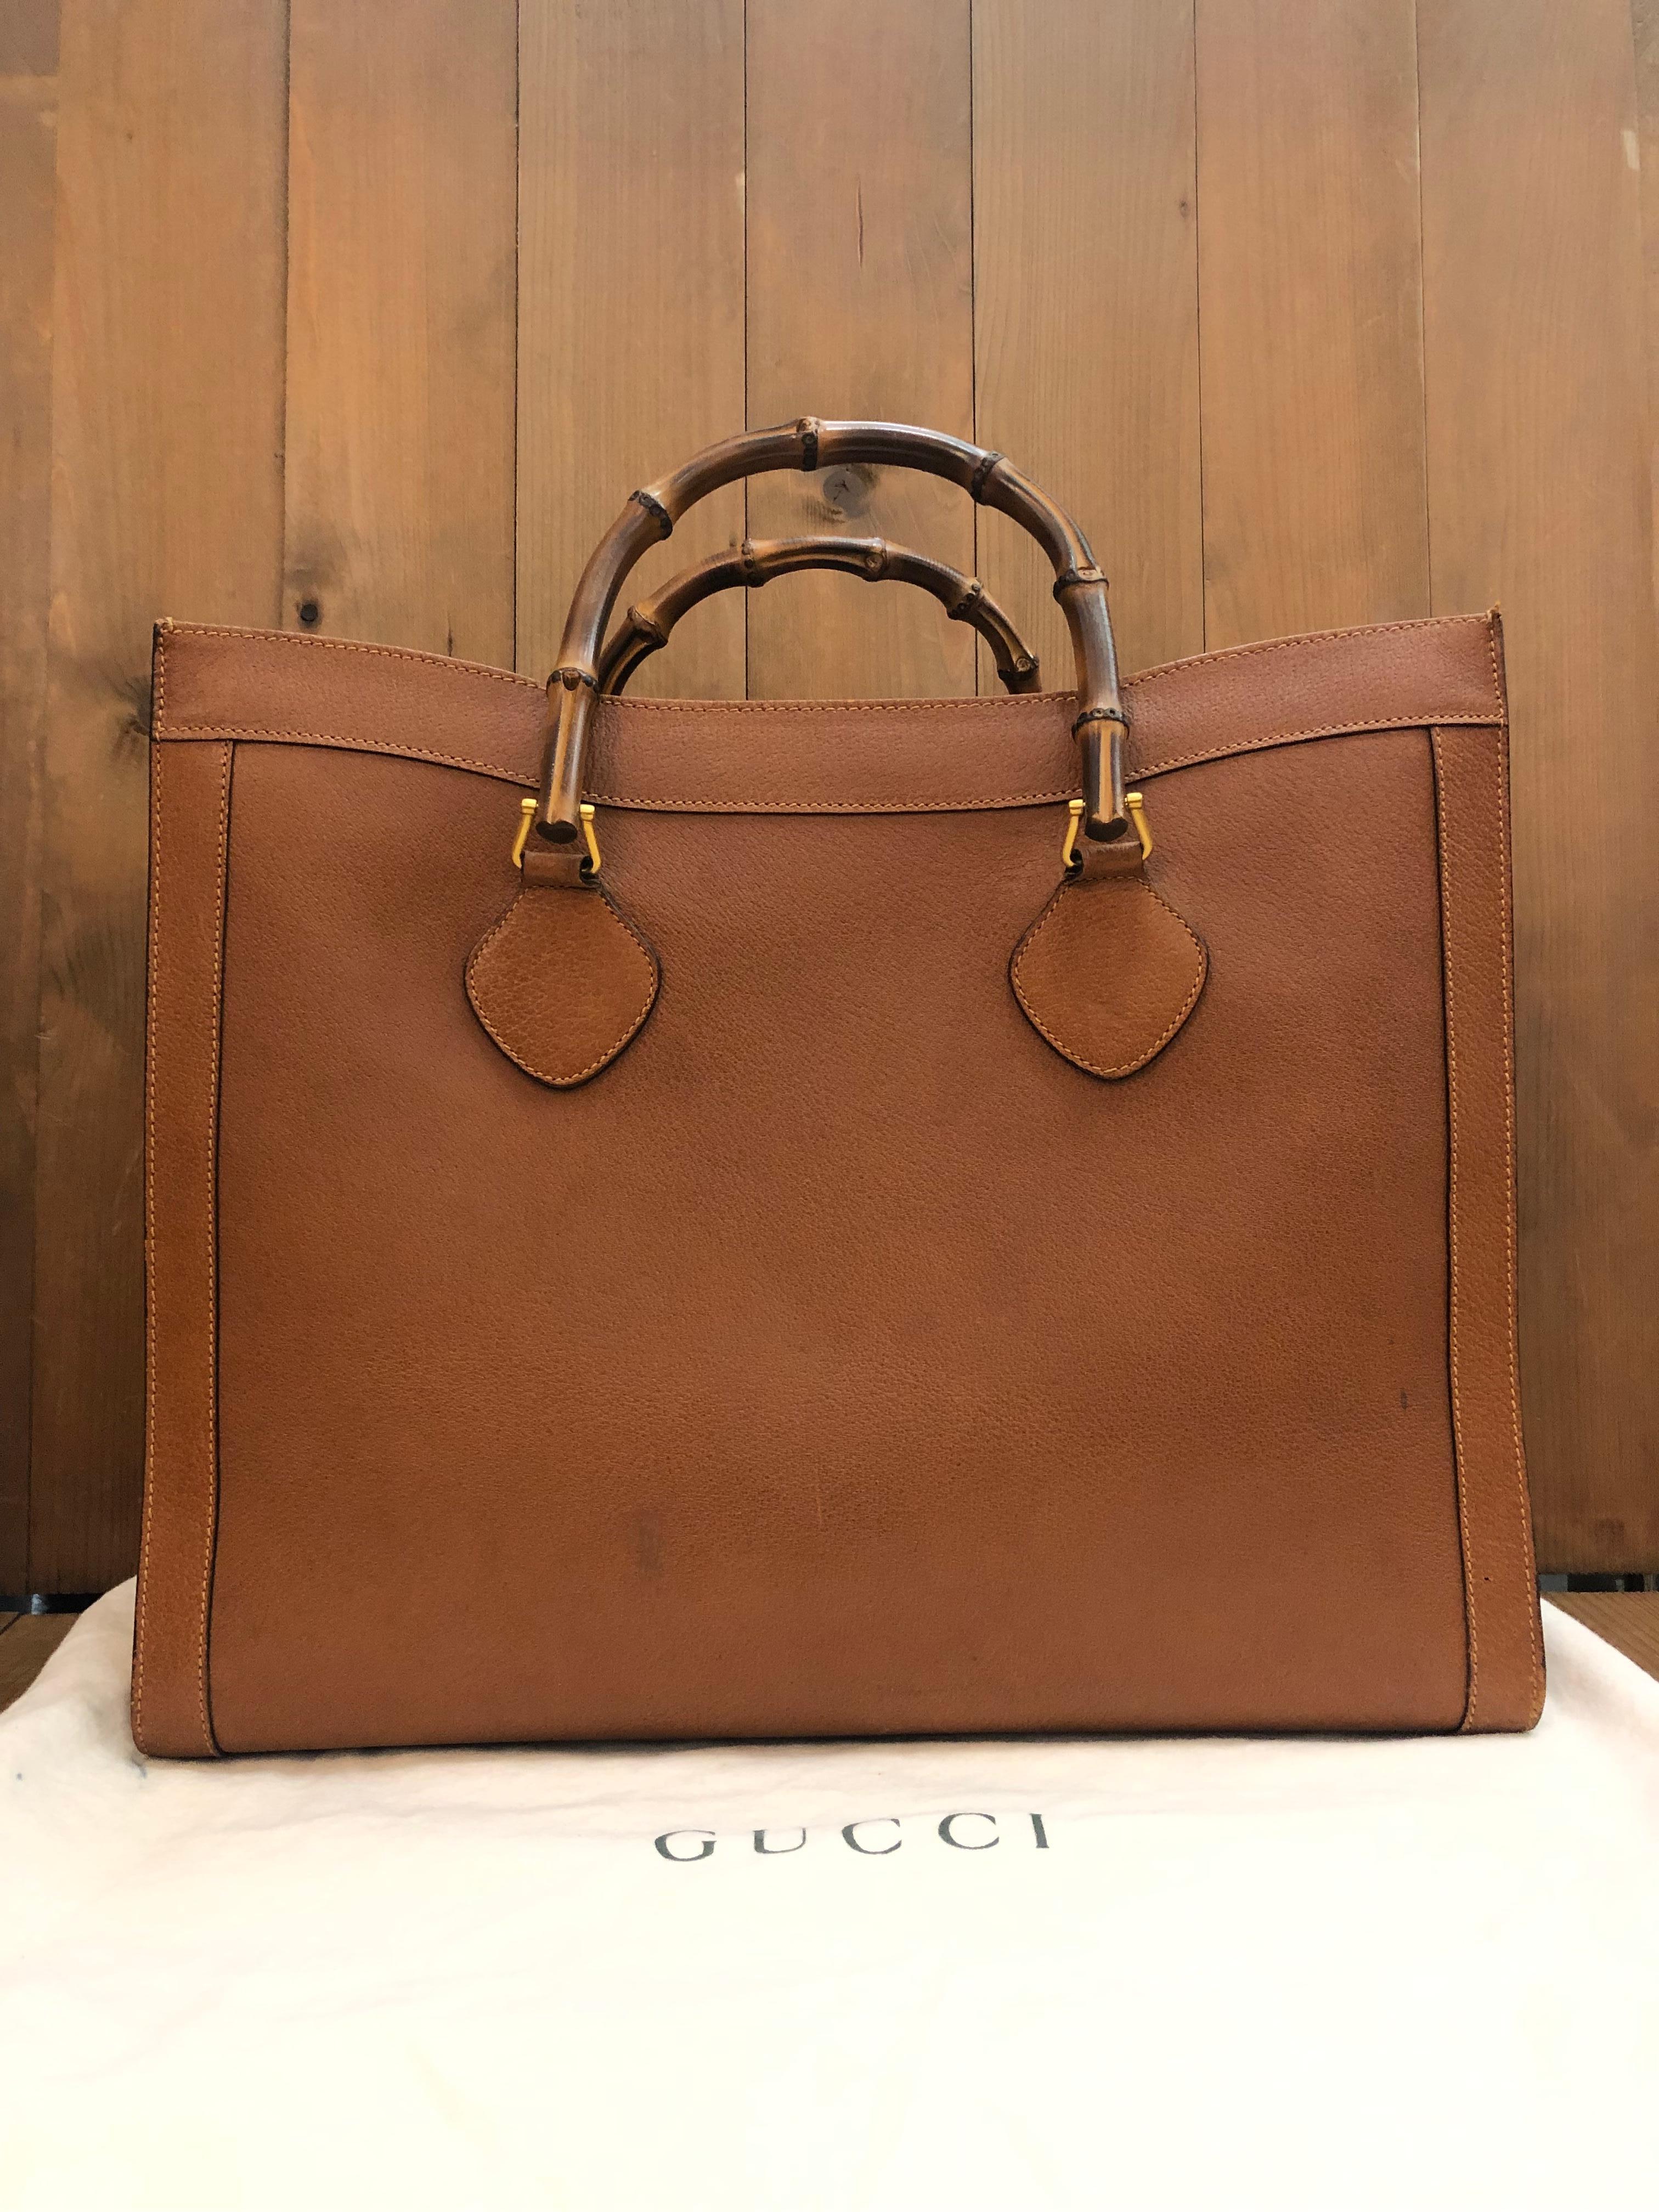 This large vintage Gucci Diana bamboo tote bag is crafted of pigskin leather in caramel brown featuring matte gold-toned hardware and bamboo handles. Wide top opens to one single compartment lined with brown leather featuring a zippered pocket. This